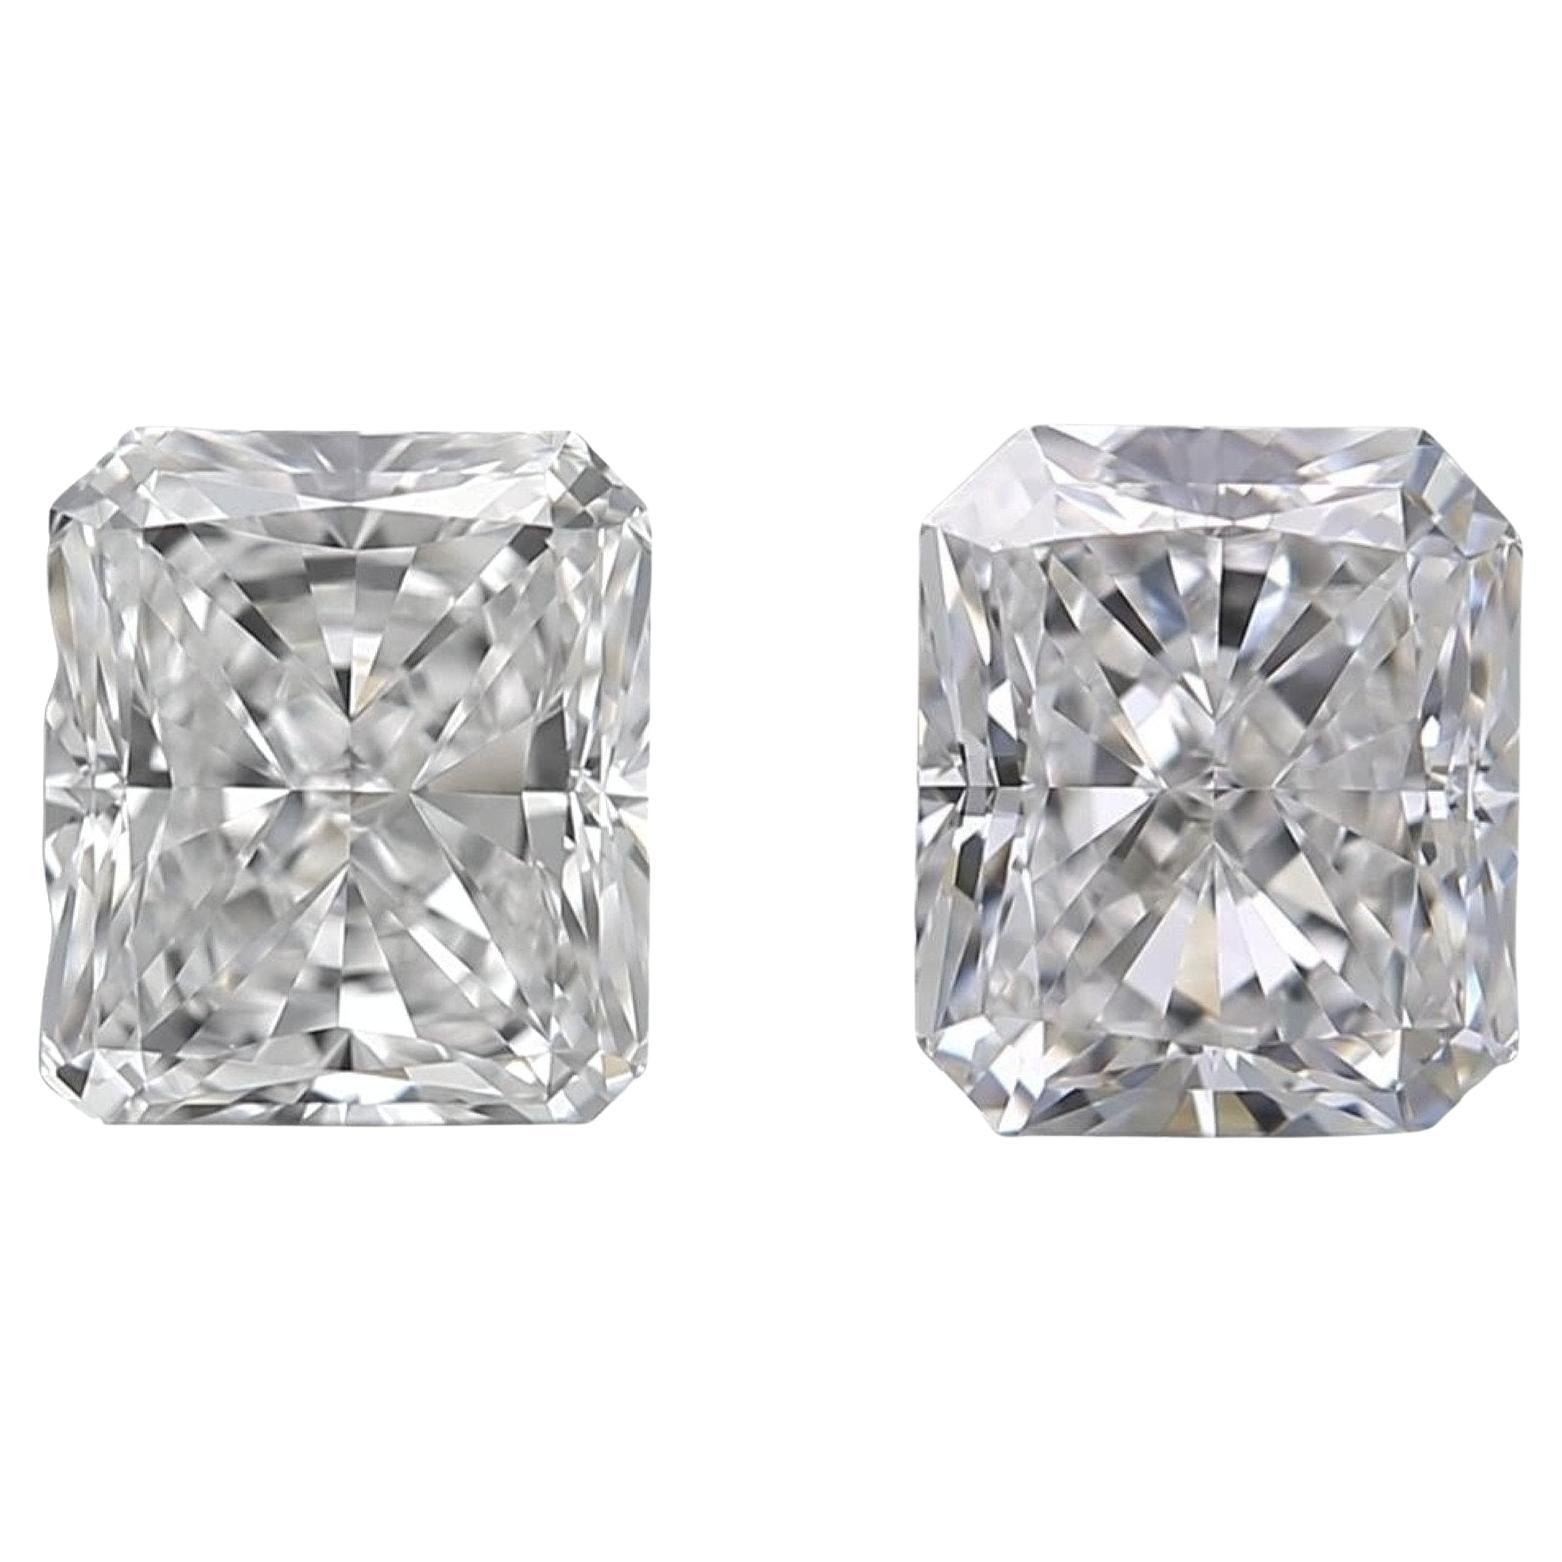 Dazzling 2 pcs Natural Diamonds with 1.41 ct Radiant D VVS1 GIA Certificate